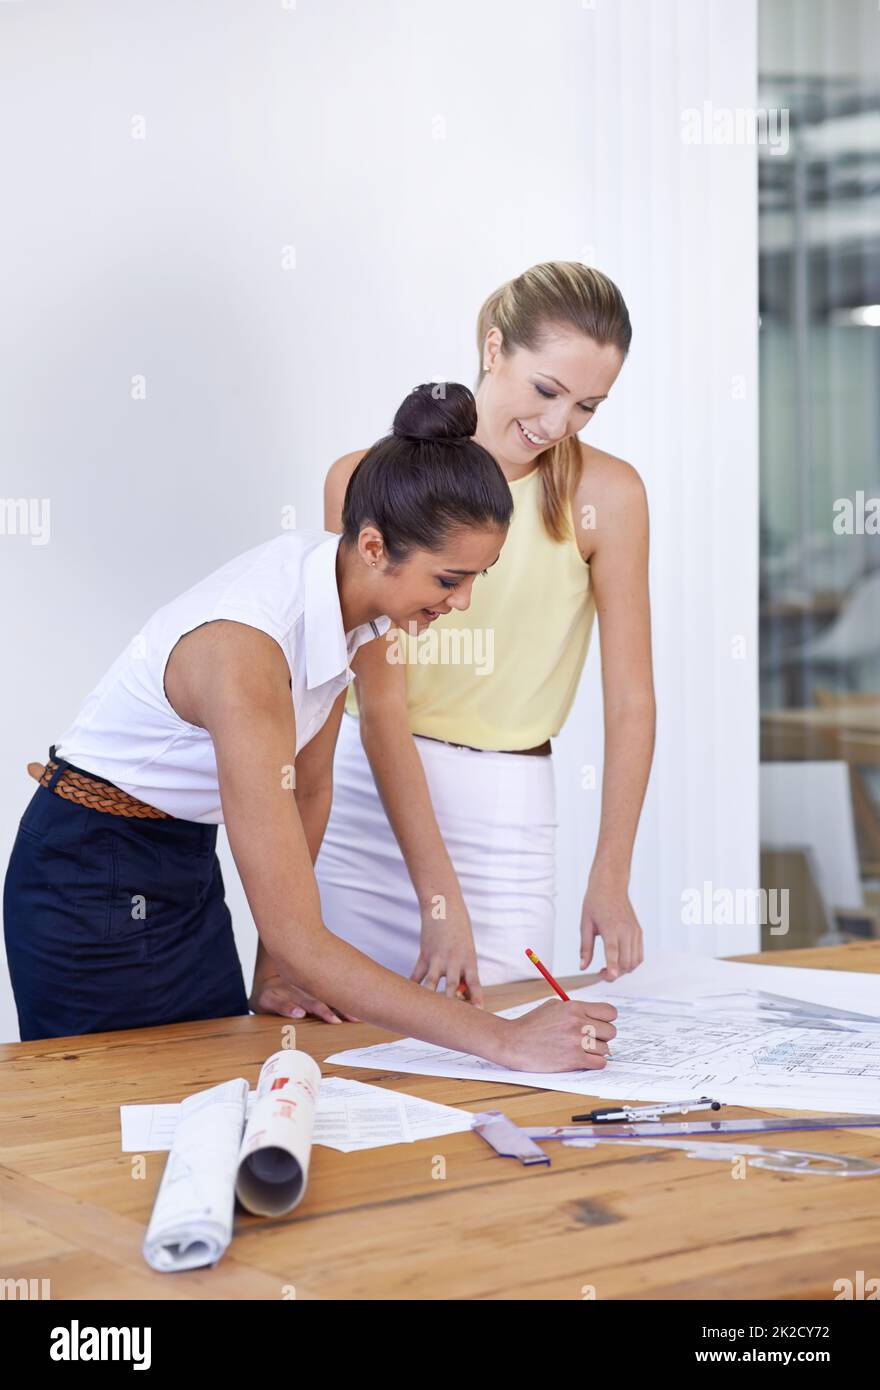 You want these 2 to design your building. Two young female architects working on some new designs. Stock Photo